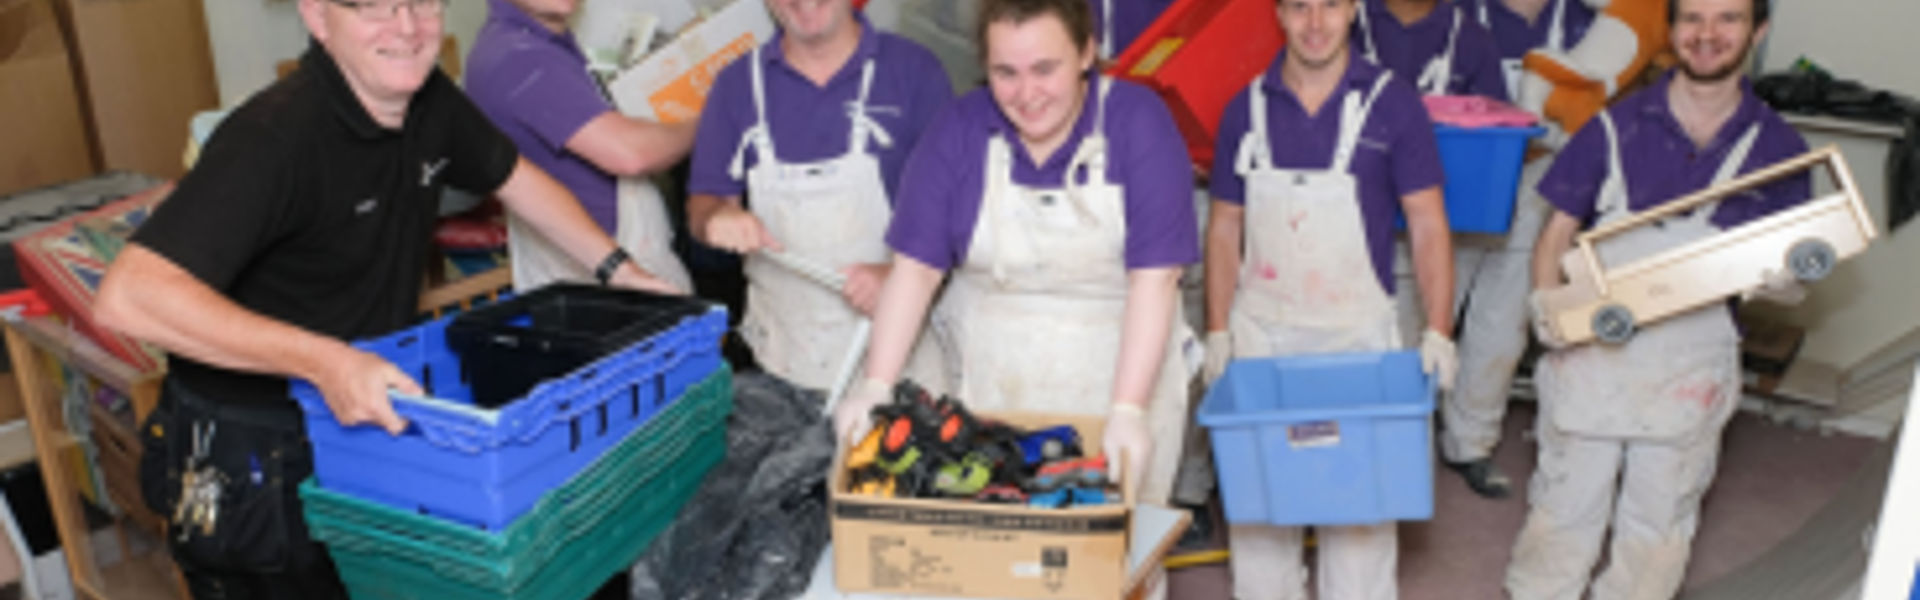 Blog Images Cropped Images Volunteers Rescue Water Damaged Charity Stock Store Building After Roof Lead Theft At Zoes Place 768X512 0 0 0 0 153 (1)